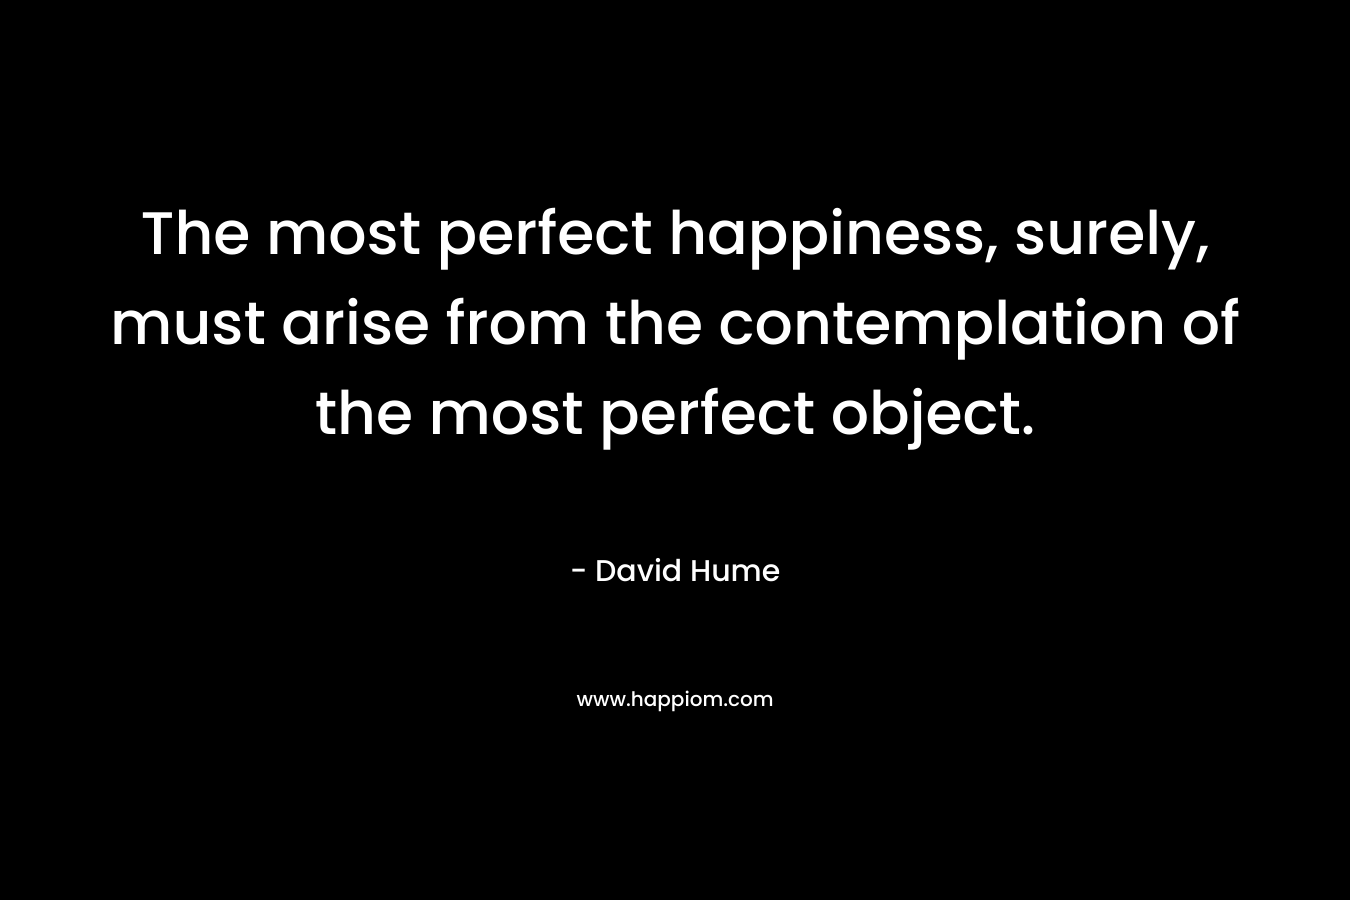 The most perfect happiness, surely, must arise from the contemplation of the most perfect object. – David Hume